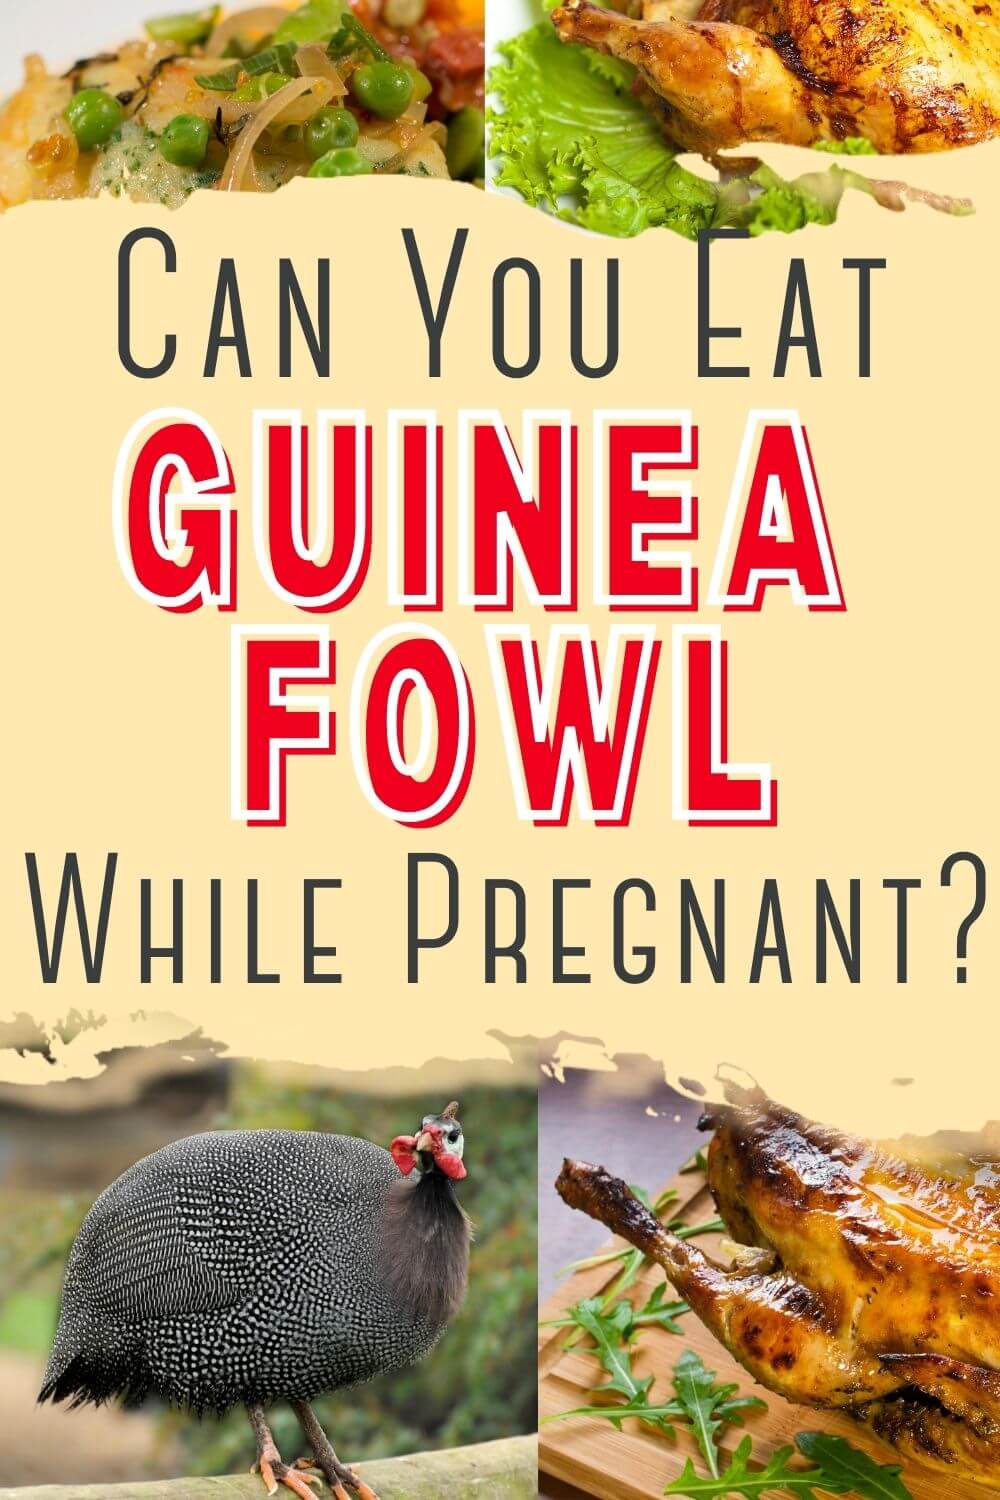 Can You Eat Guinea Fowl When Pregnant?